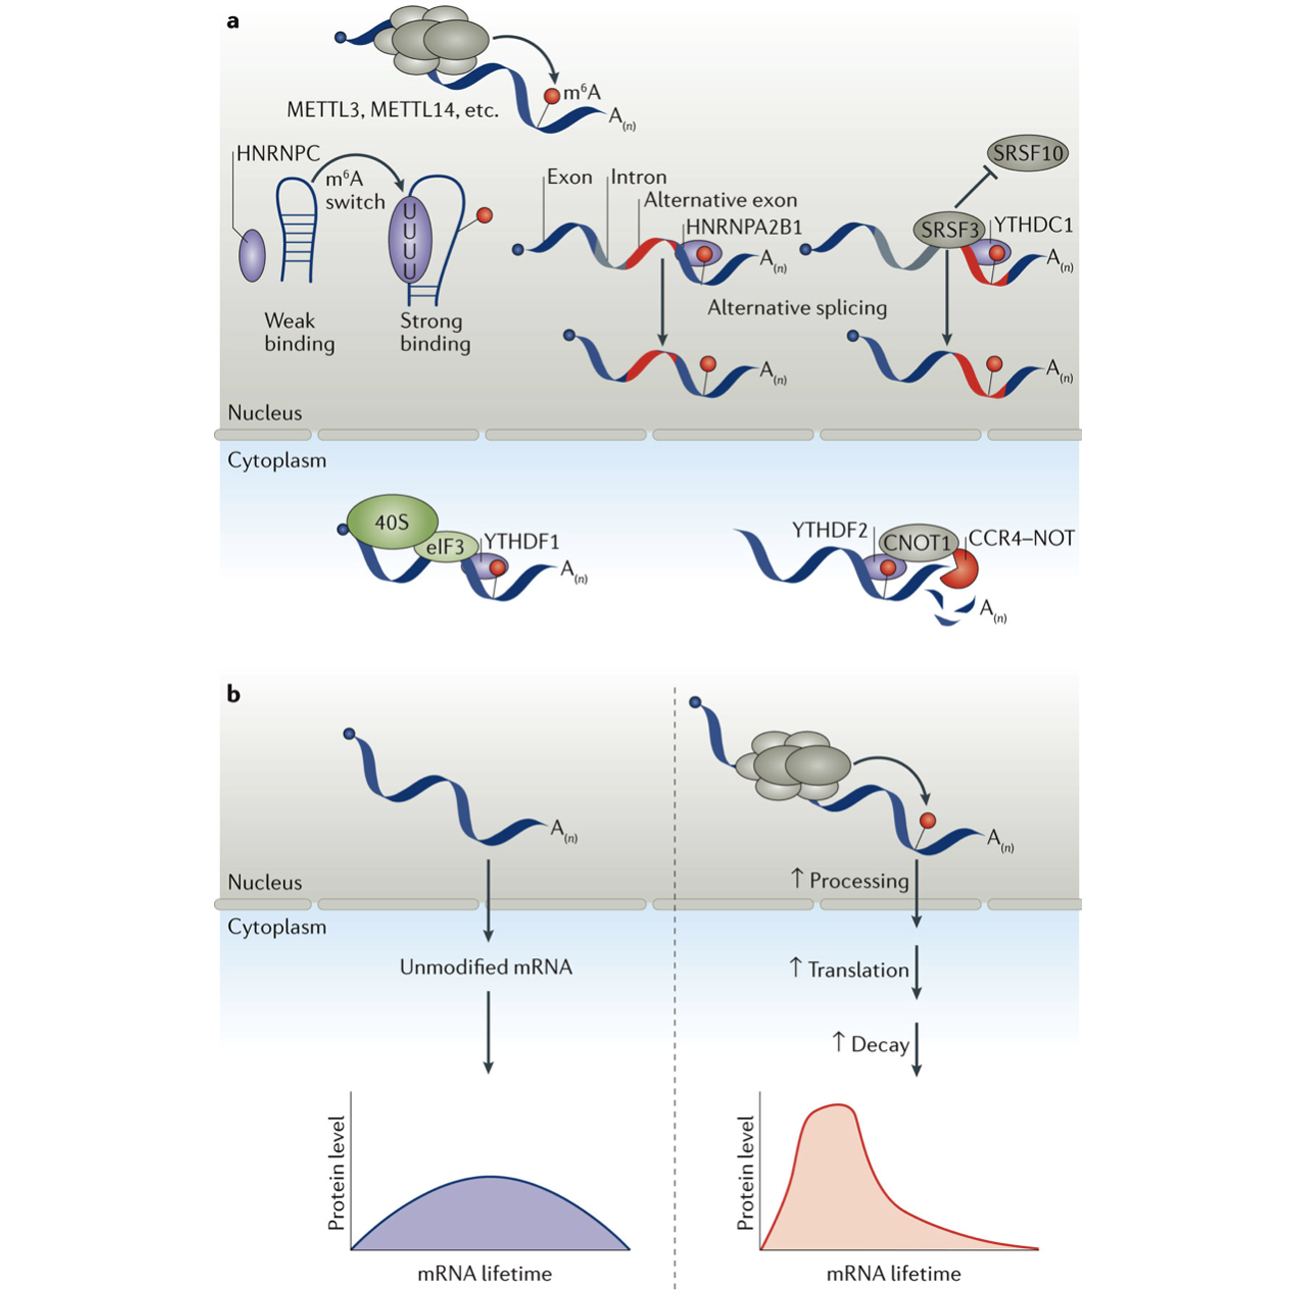  mRNA processing promotes translation and decay